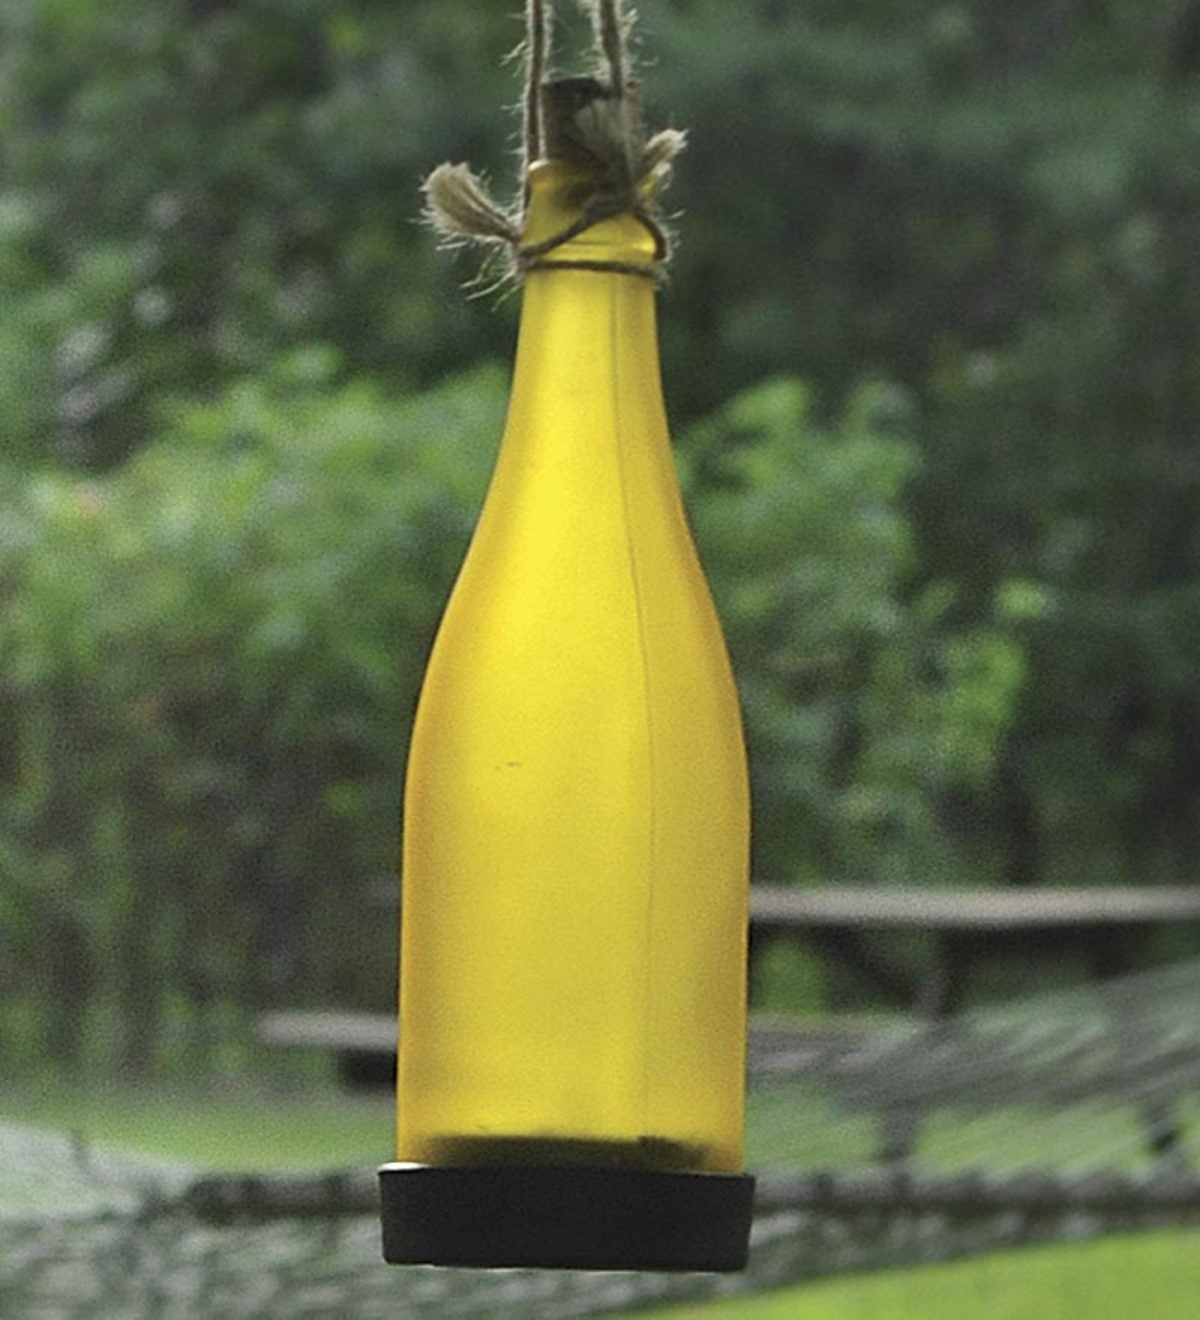 Metal Bottle Tree With Set of 10 Solar-Powered Bottles - Yellow